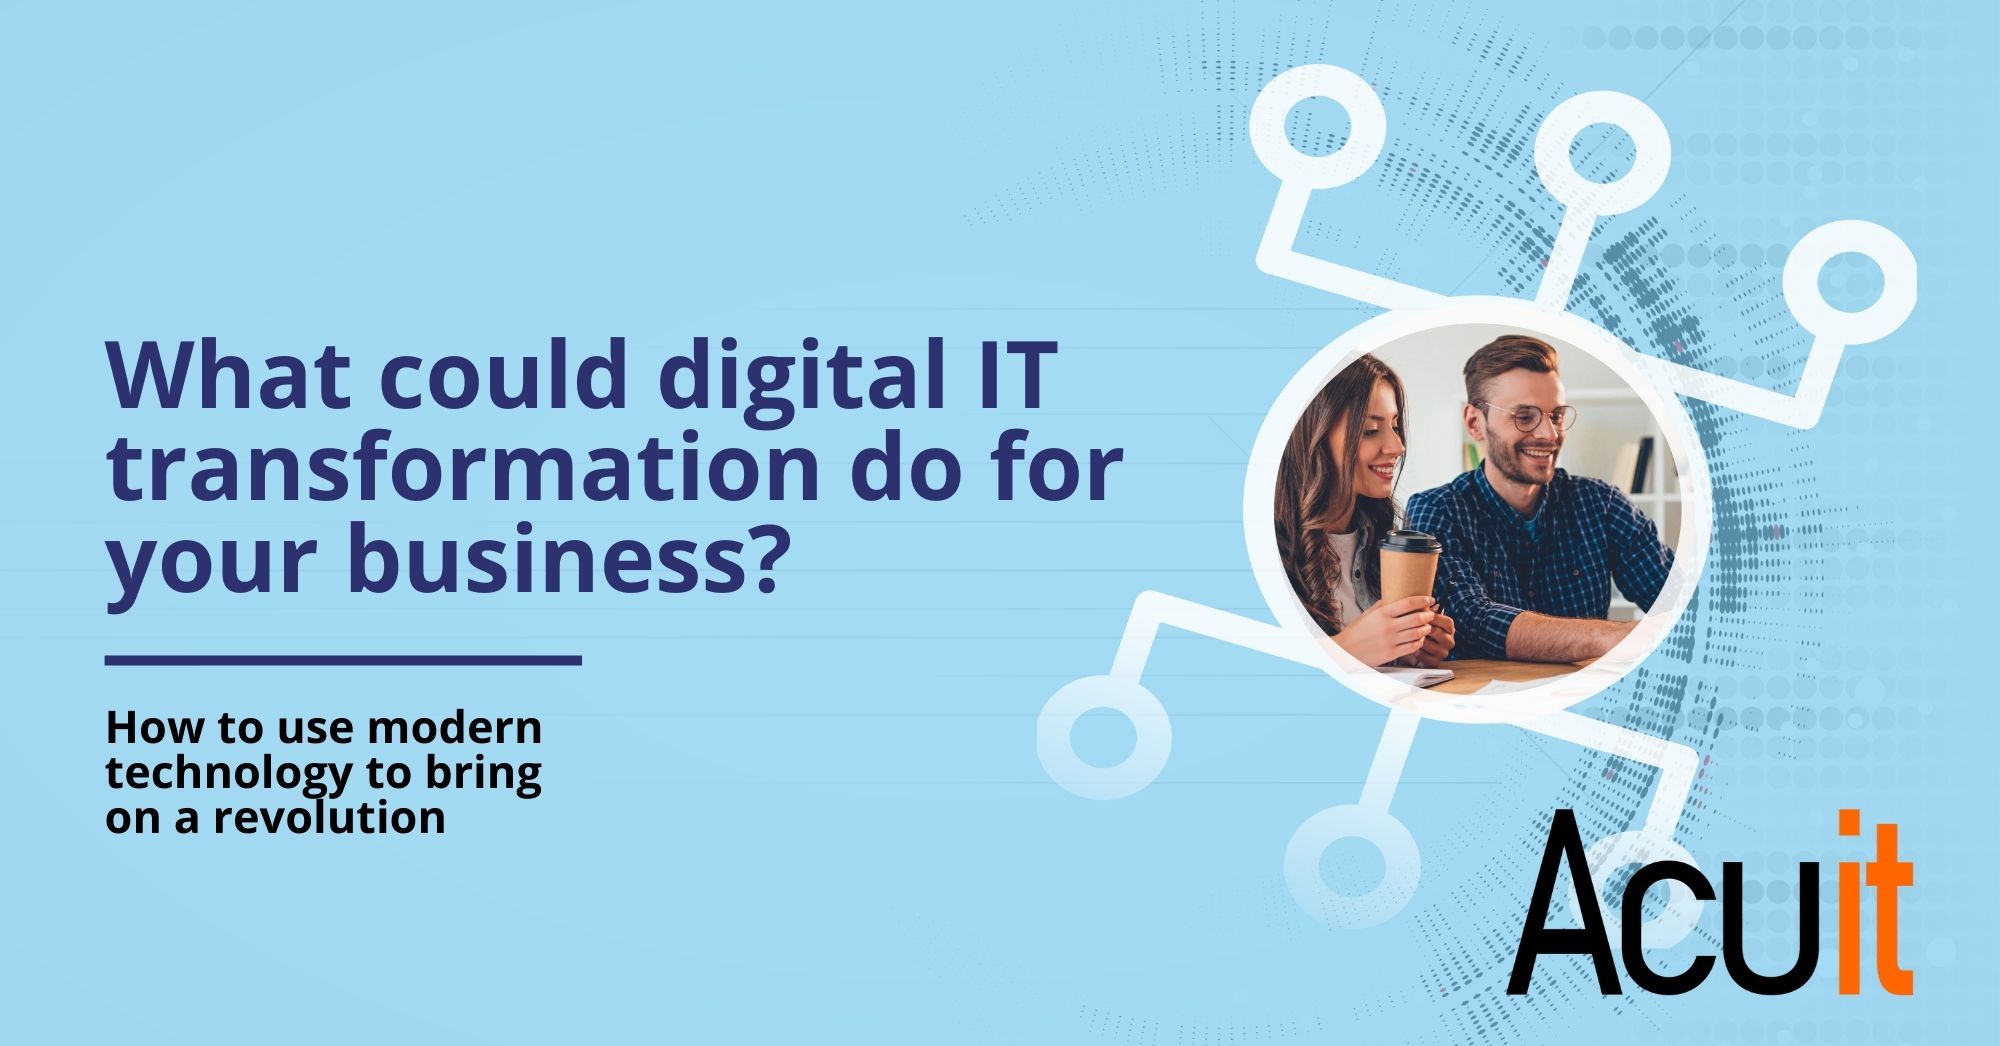 What could digital IT transformation do for your business?